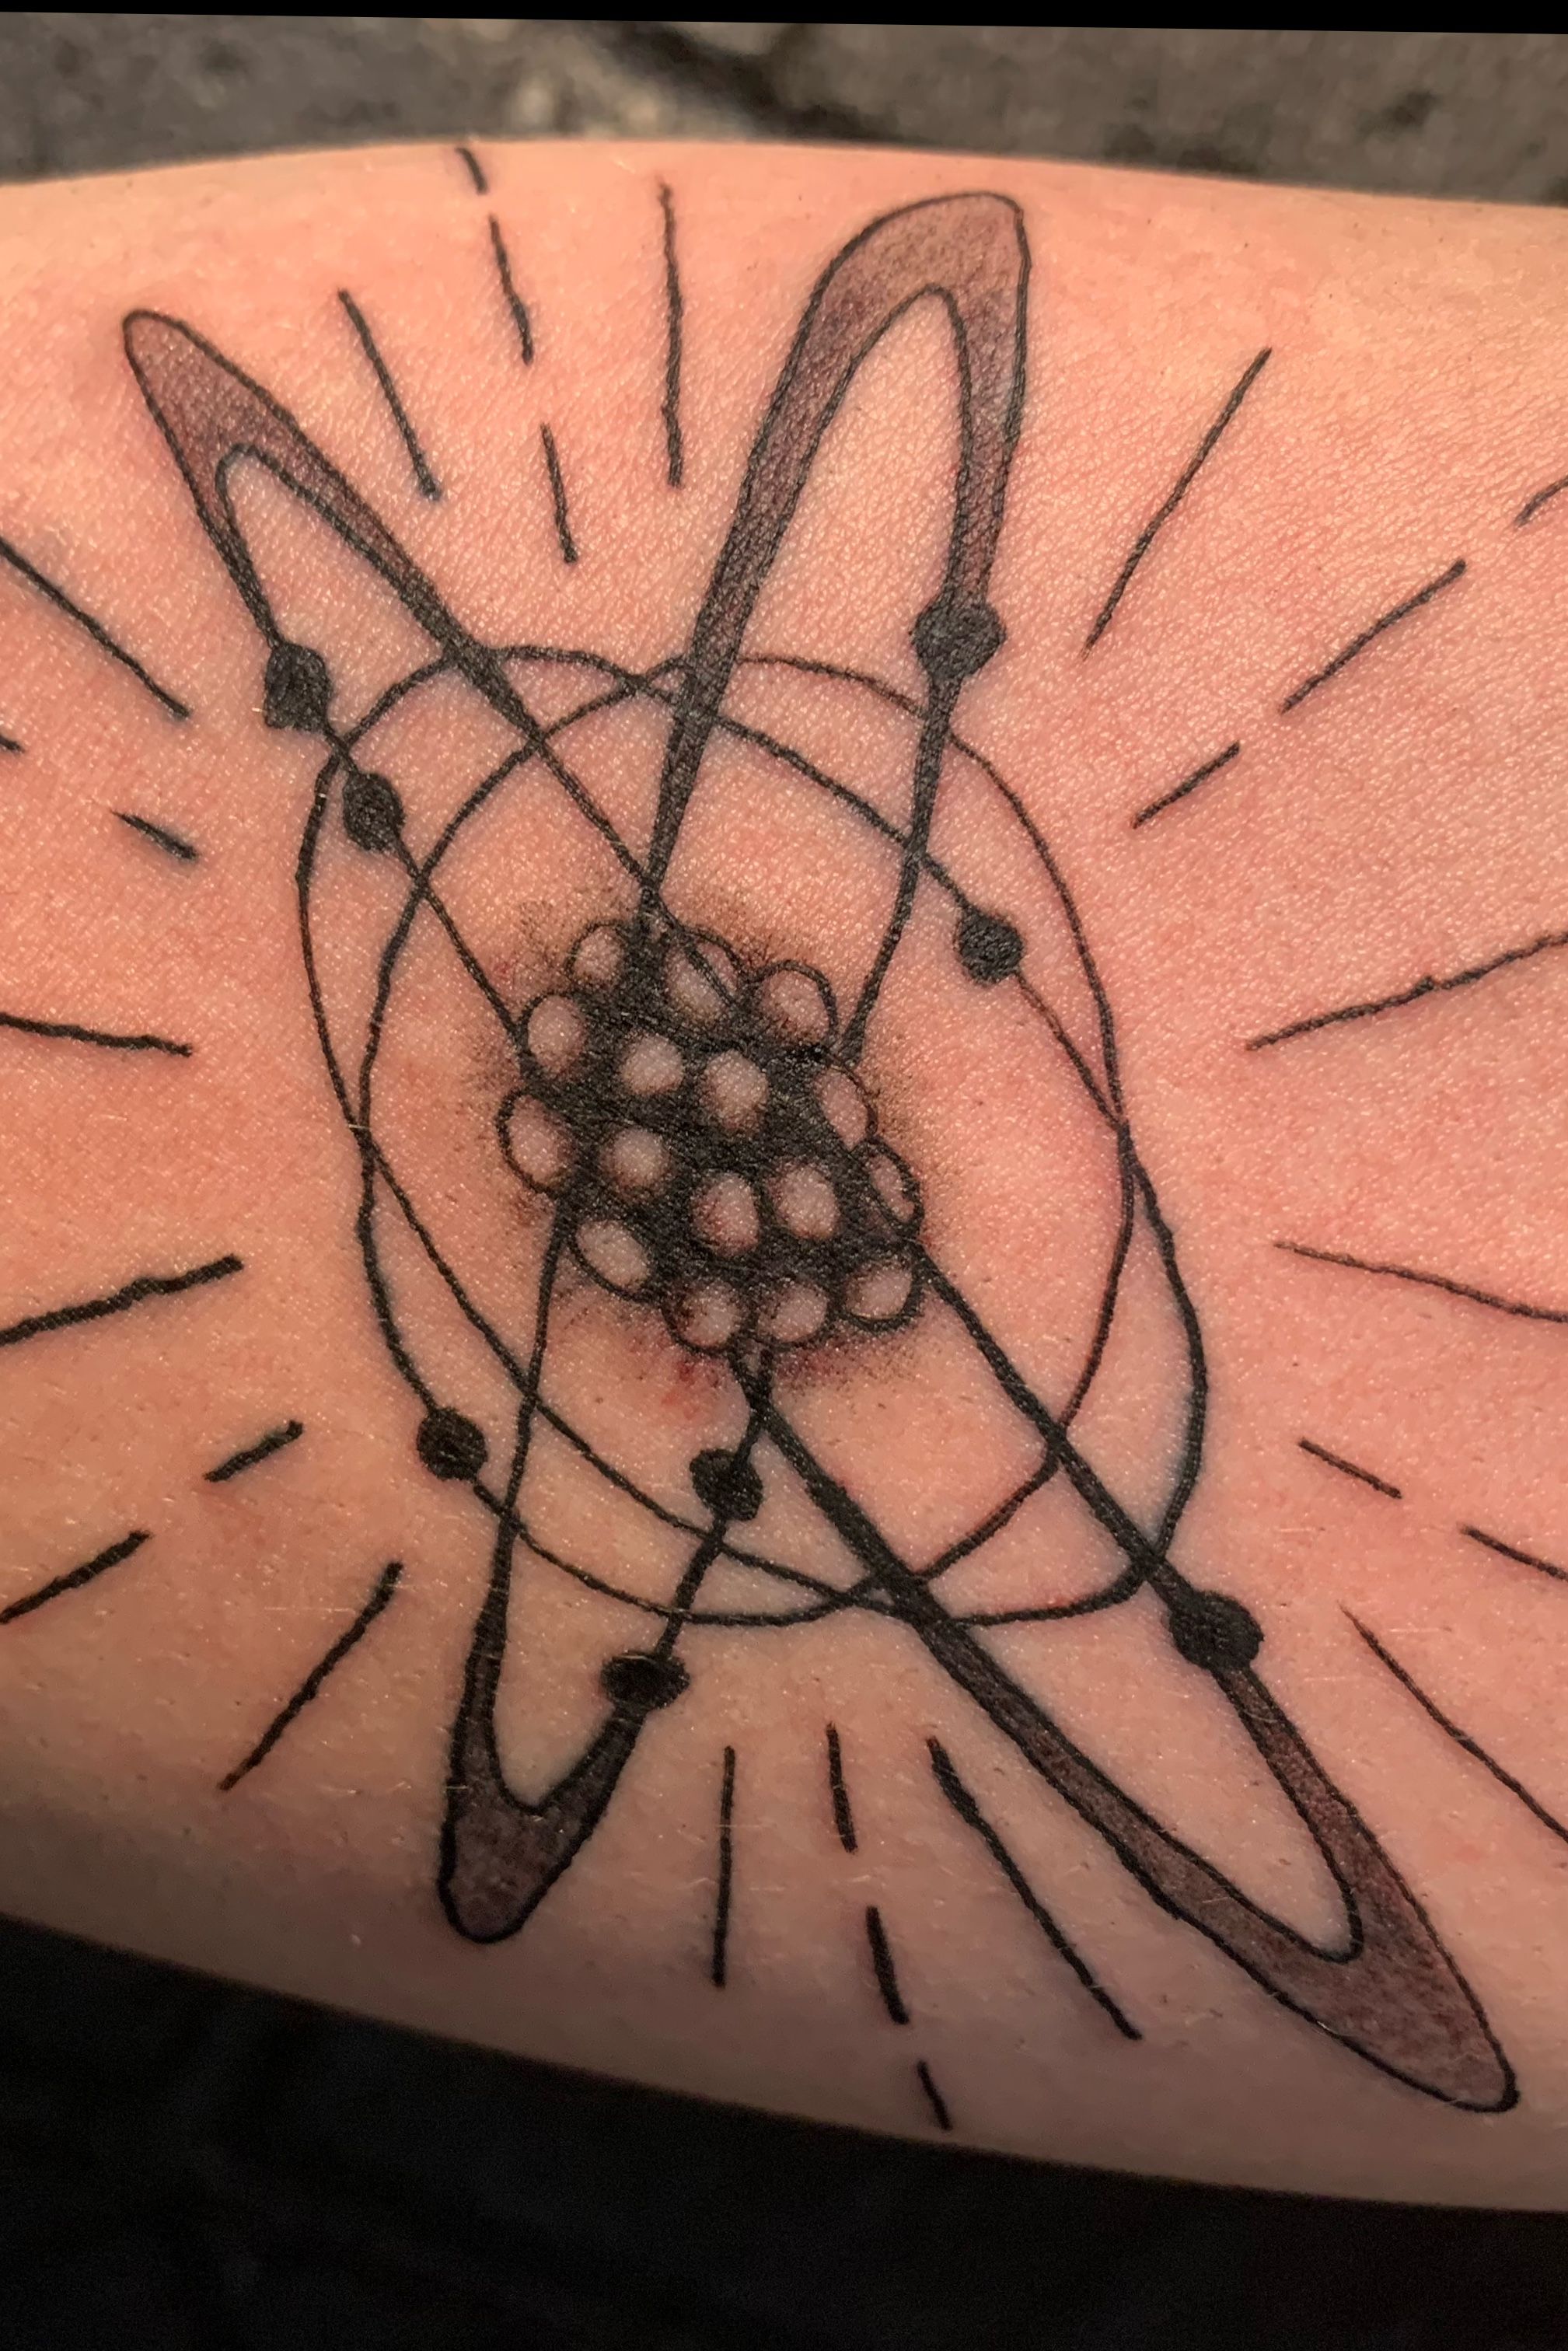 Kenhub - Beautiful ATP molecule tattoo :) ''ATP molecule - an essential  molecule for a vast array of metabolic processes in organisms. Ultimately,  it is one of the things essential to life.